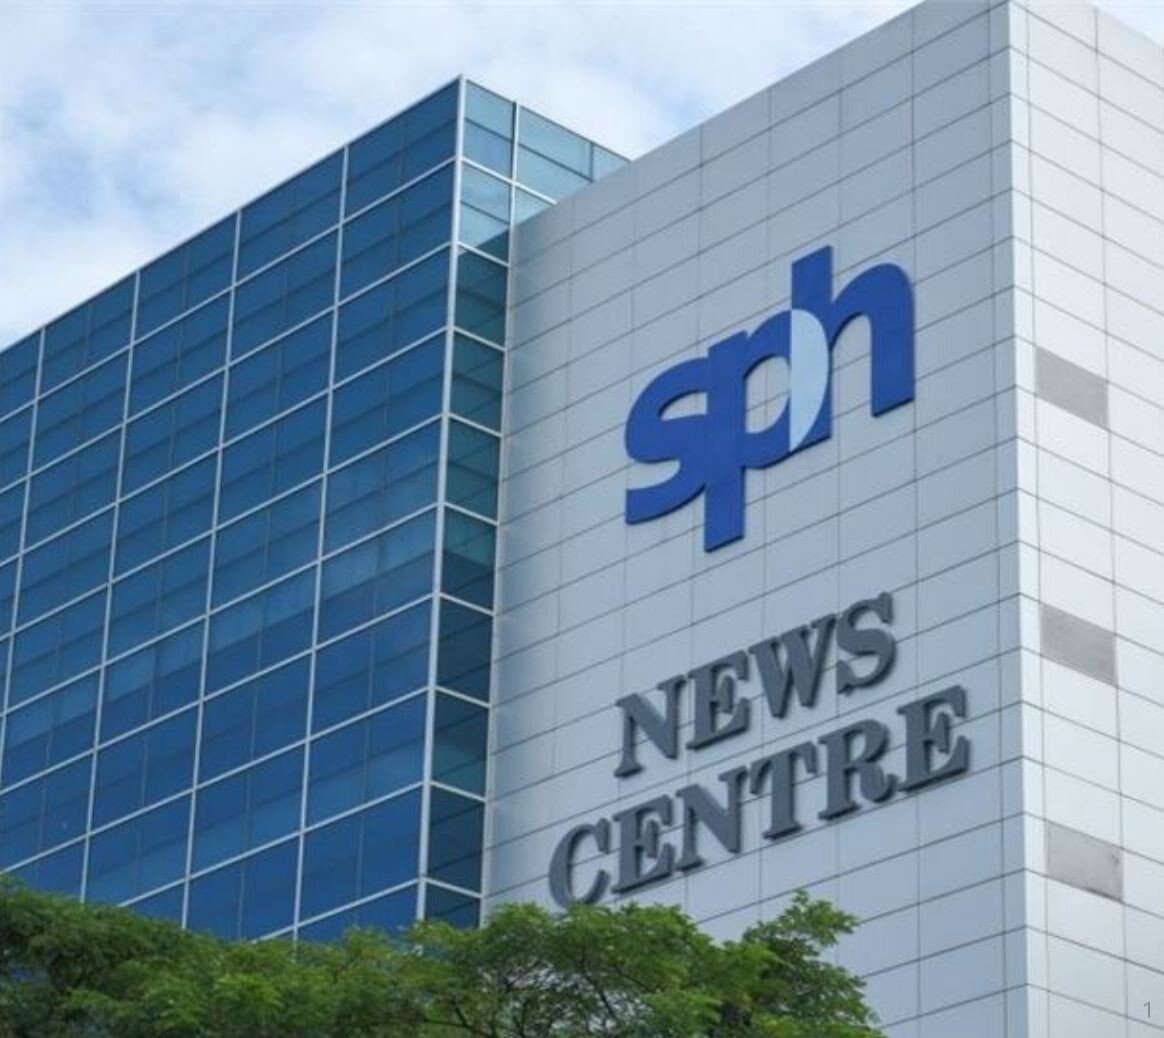 The SPH News Centre in Singapore. Photo: Handout